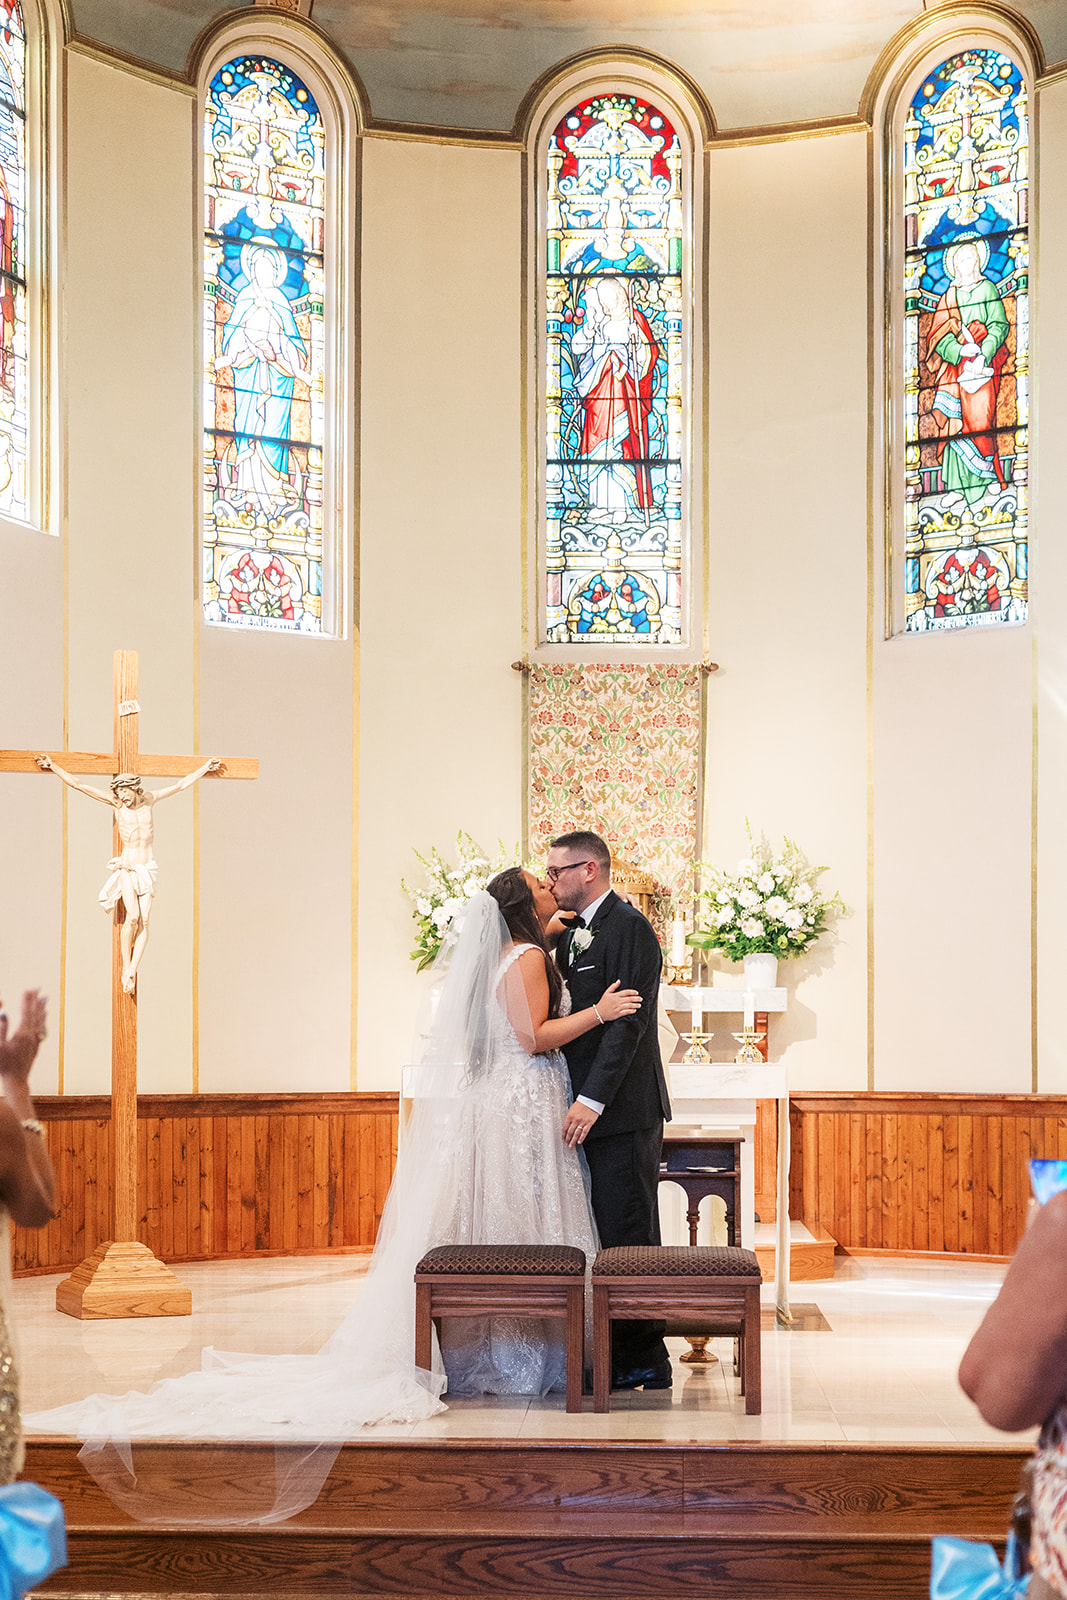 Newlyweds kiss at the church altar during their ceremony